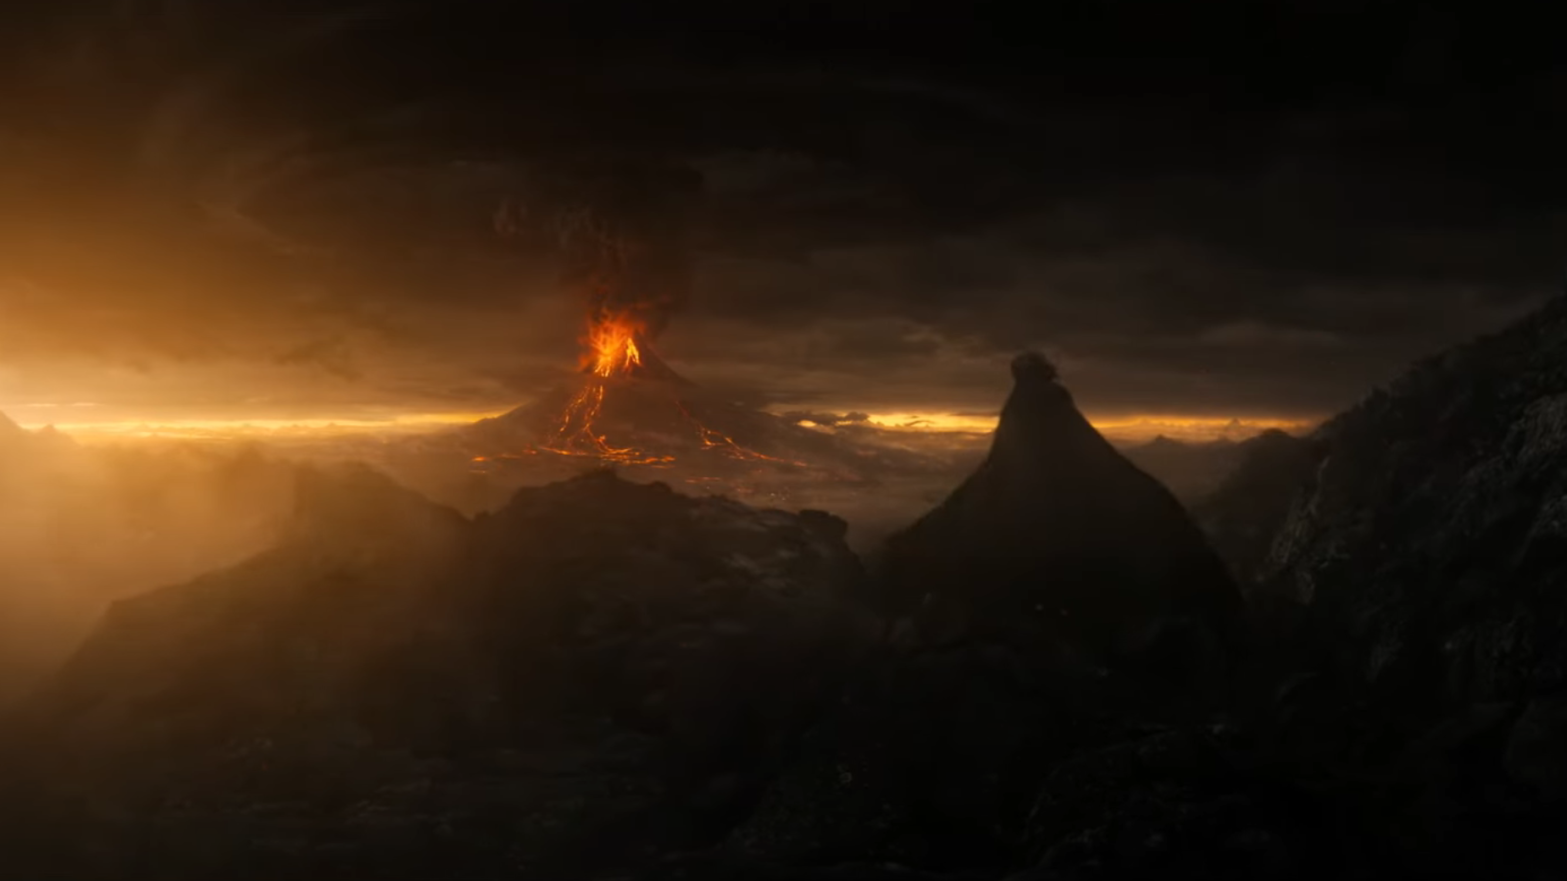 Lord of the Rings: The Rings of Power’s Season 2 Trailer Heralds the Rise of a Dark Lord